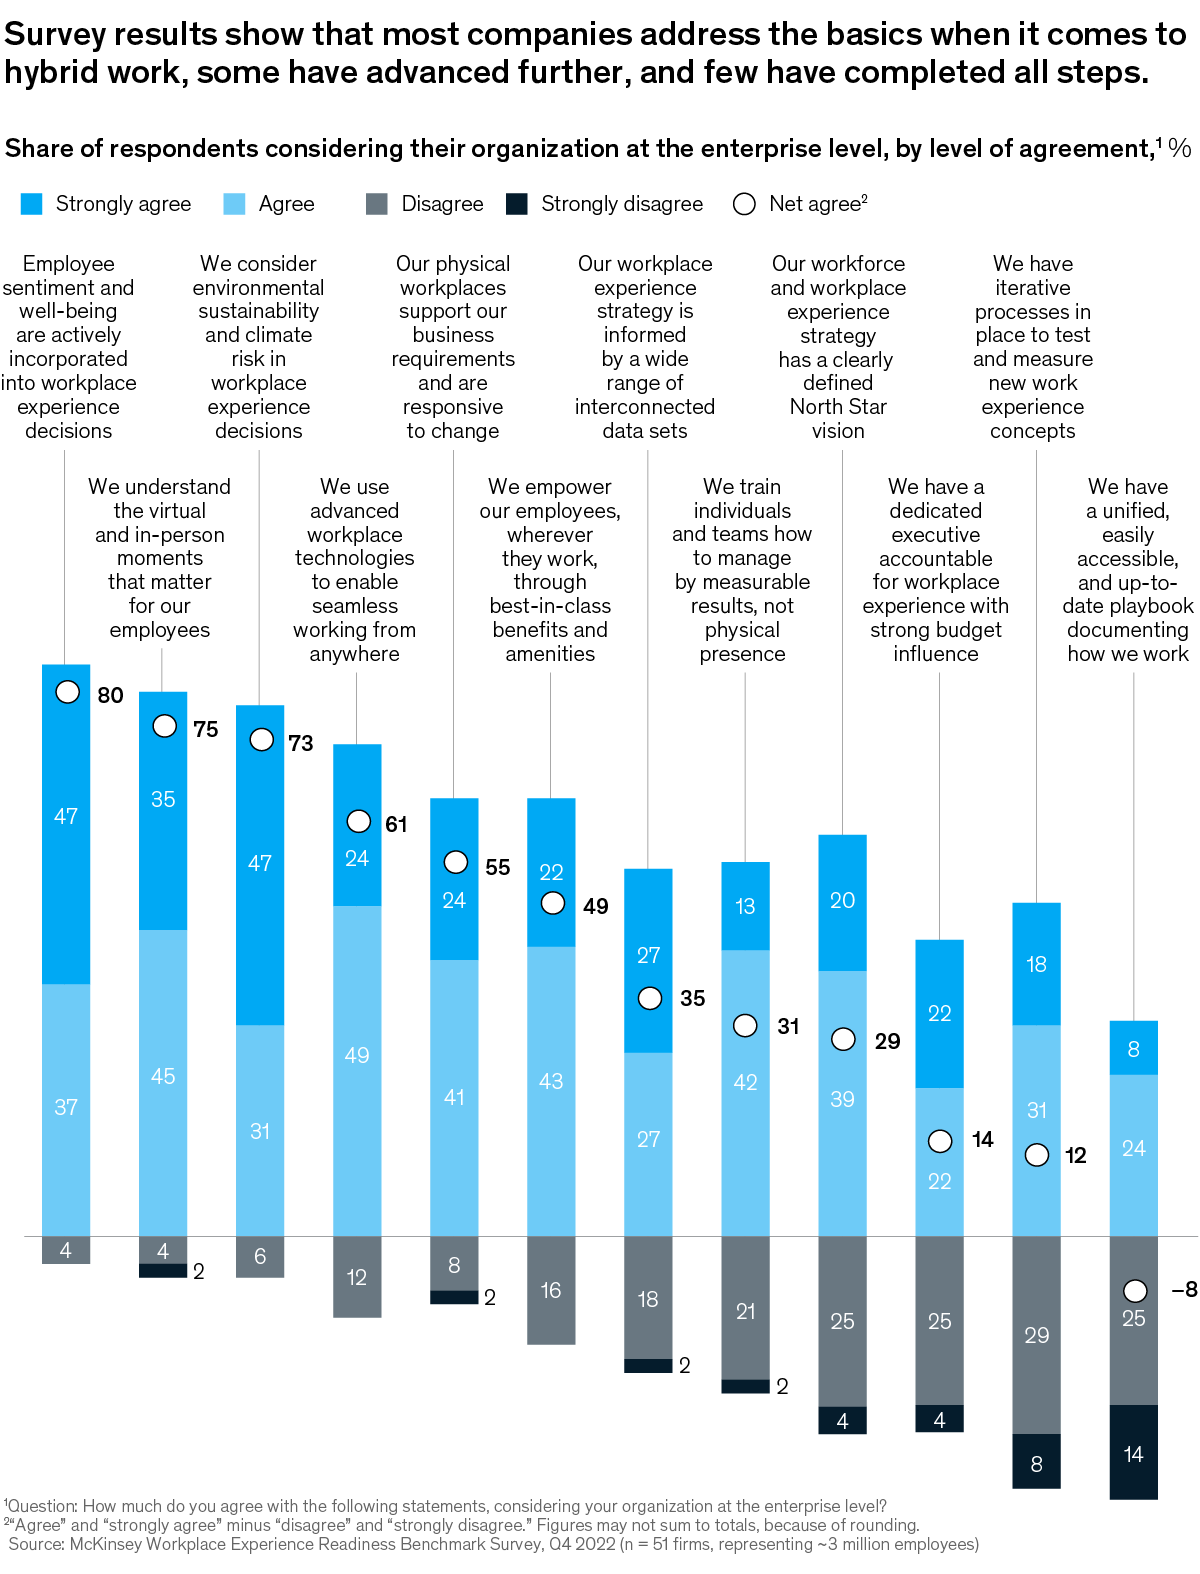 A chart titled “Share of respondents considering their organization at the enterprise level, by level of agreement,” Click to open the full article on McKinsey.com.

